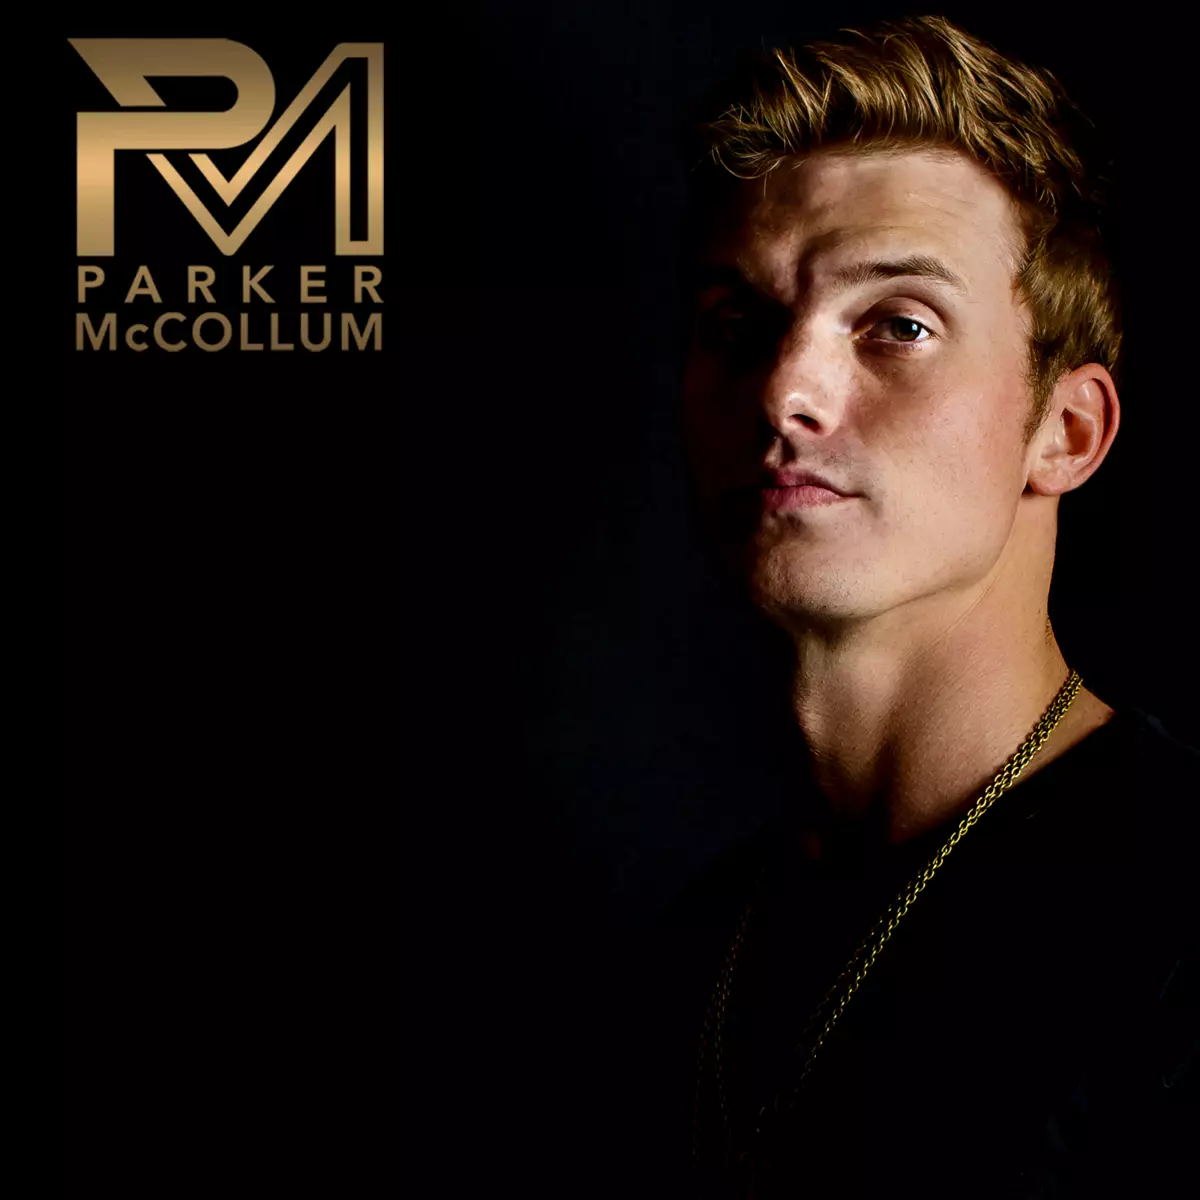 Tickets for Parker McCollum at Railfest May 11 on Sale Now